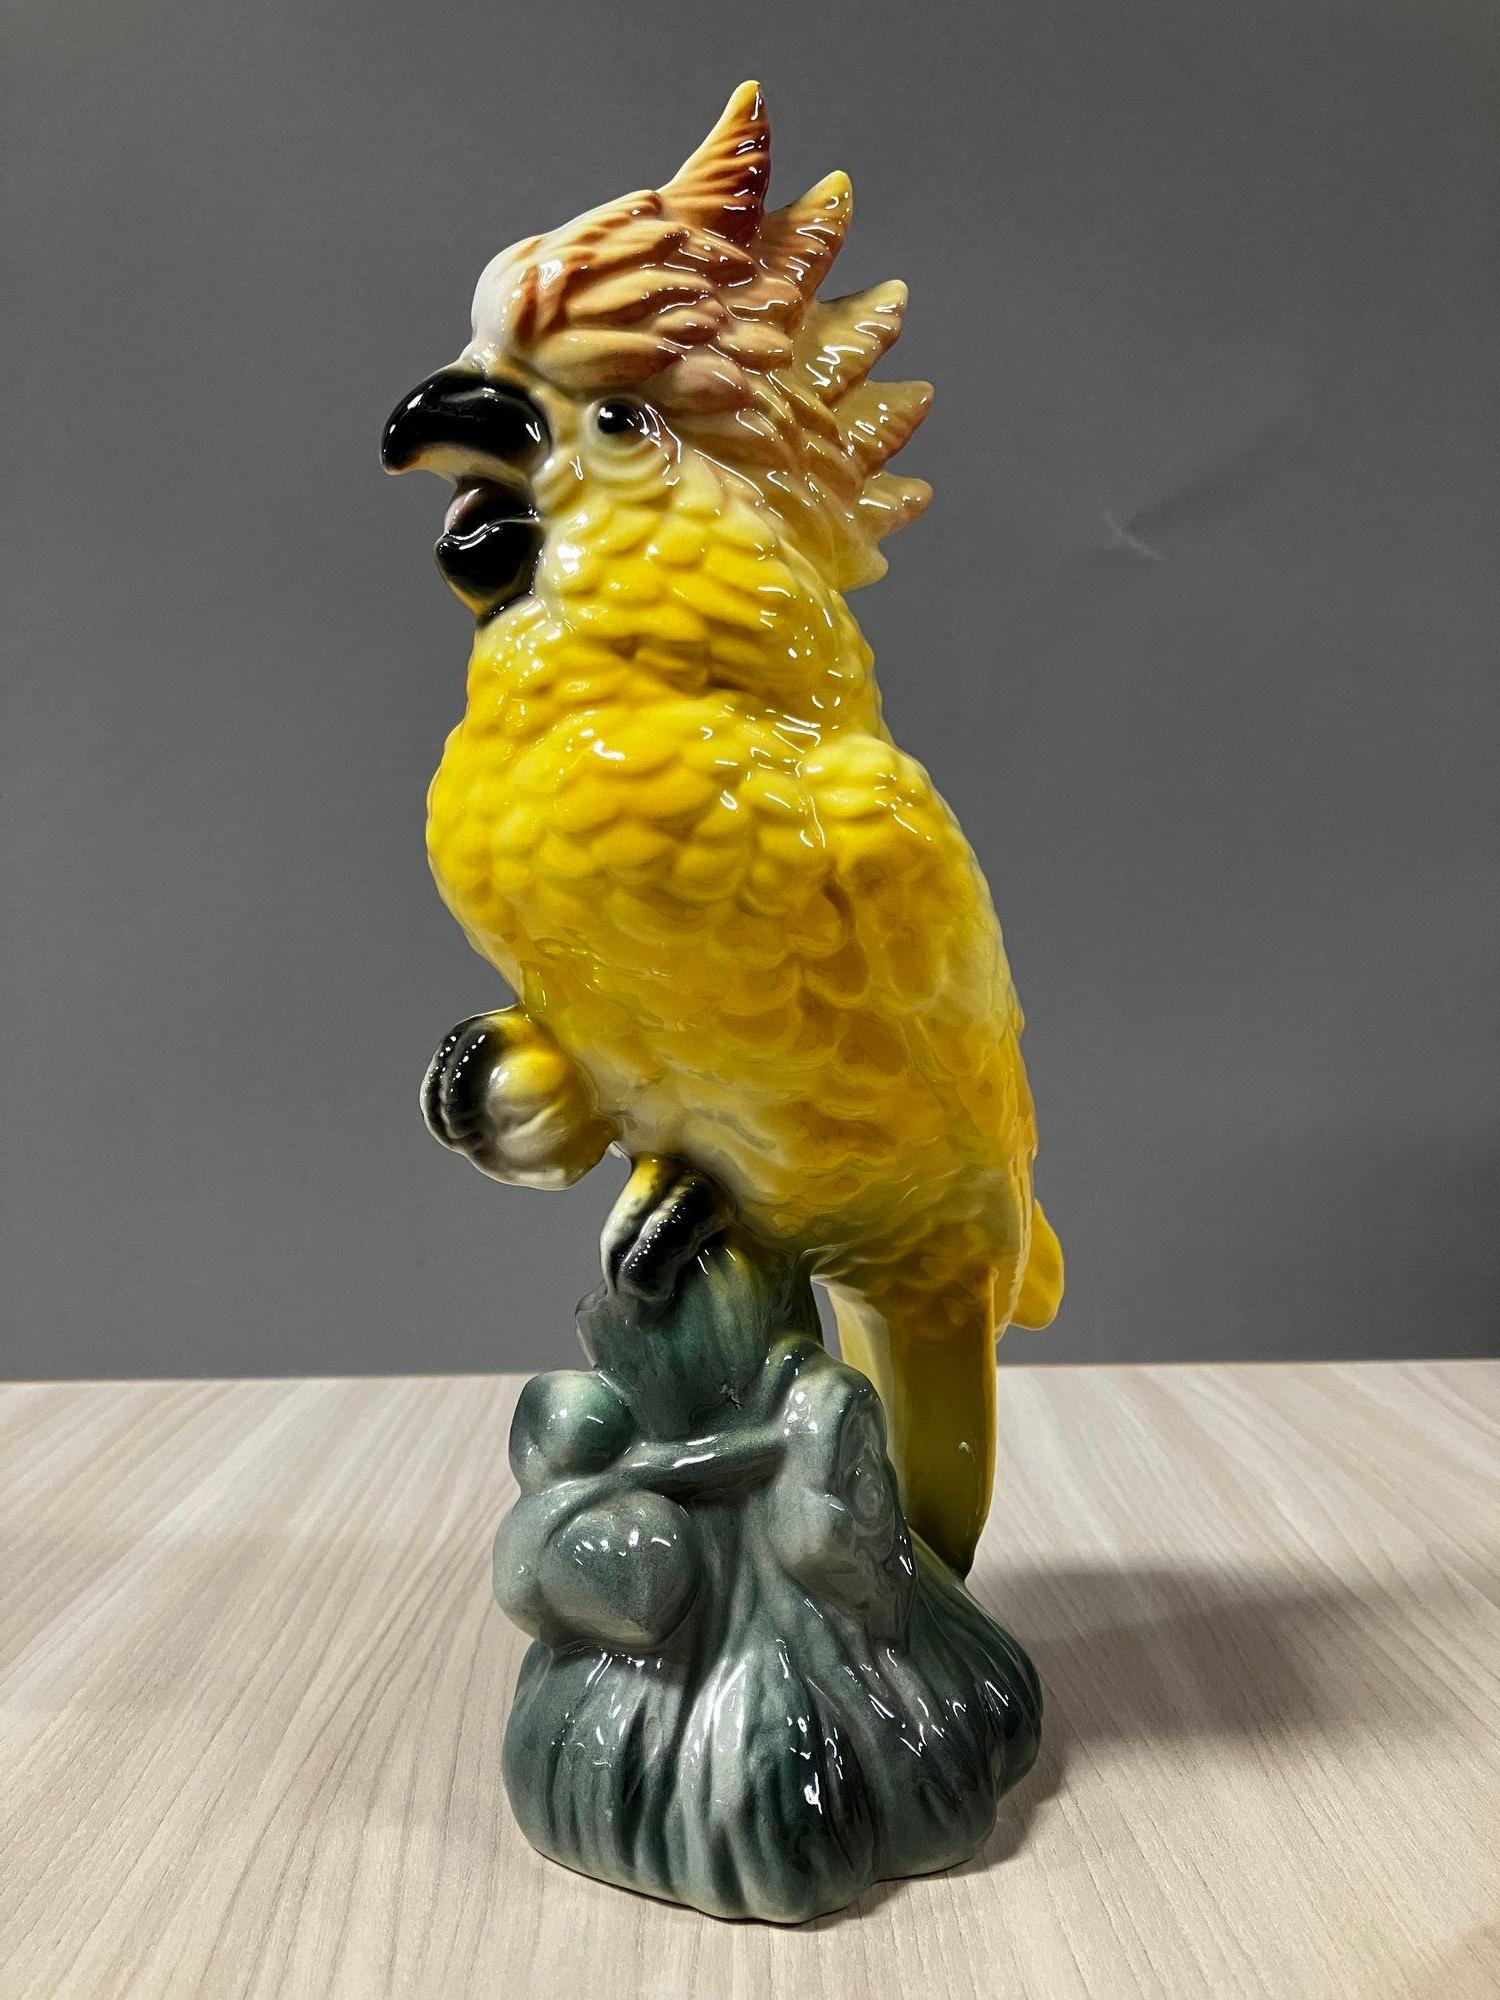 Early Mid-Century Ceramic Tropical yellow colored Cockatoo on a Branch by Fame California Potter William Maddux.

A great example of Hawaiian mania that swept the USA After WWII with many American troopers fighting on the Pacific front bringing the